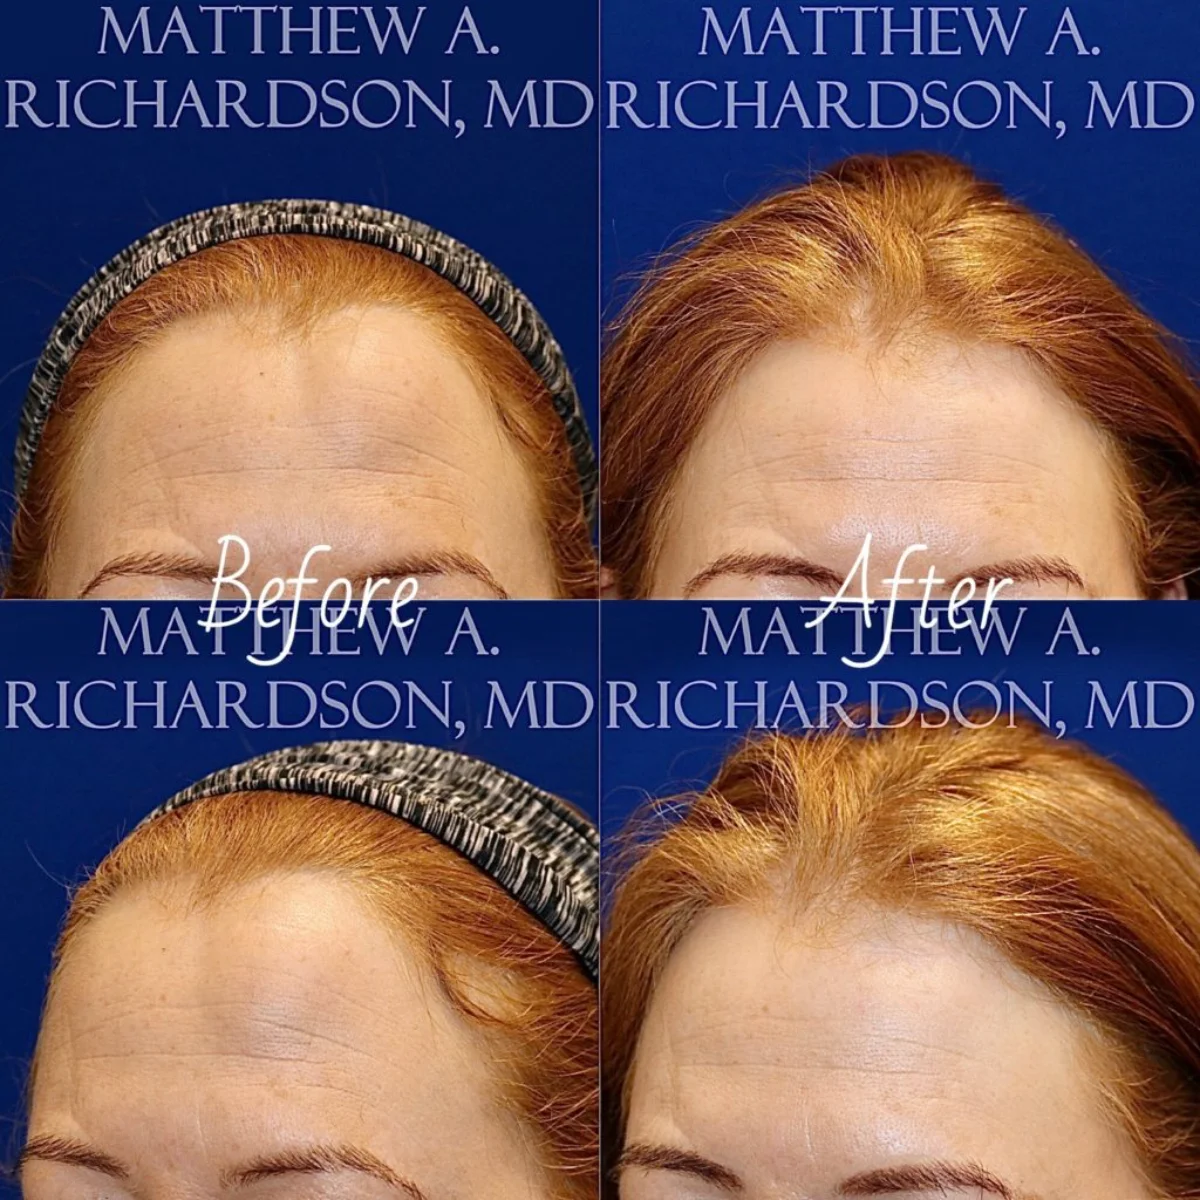 Lipoma Before and After Performed by Matthew A. Richardson, MD